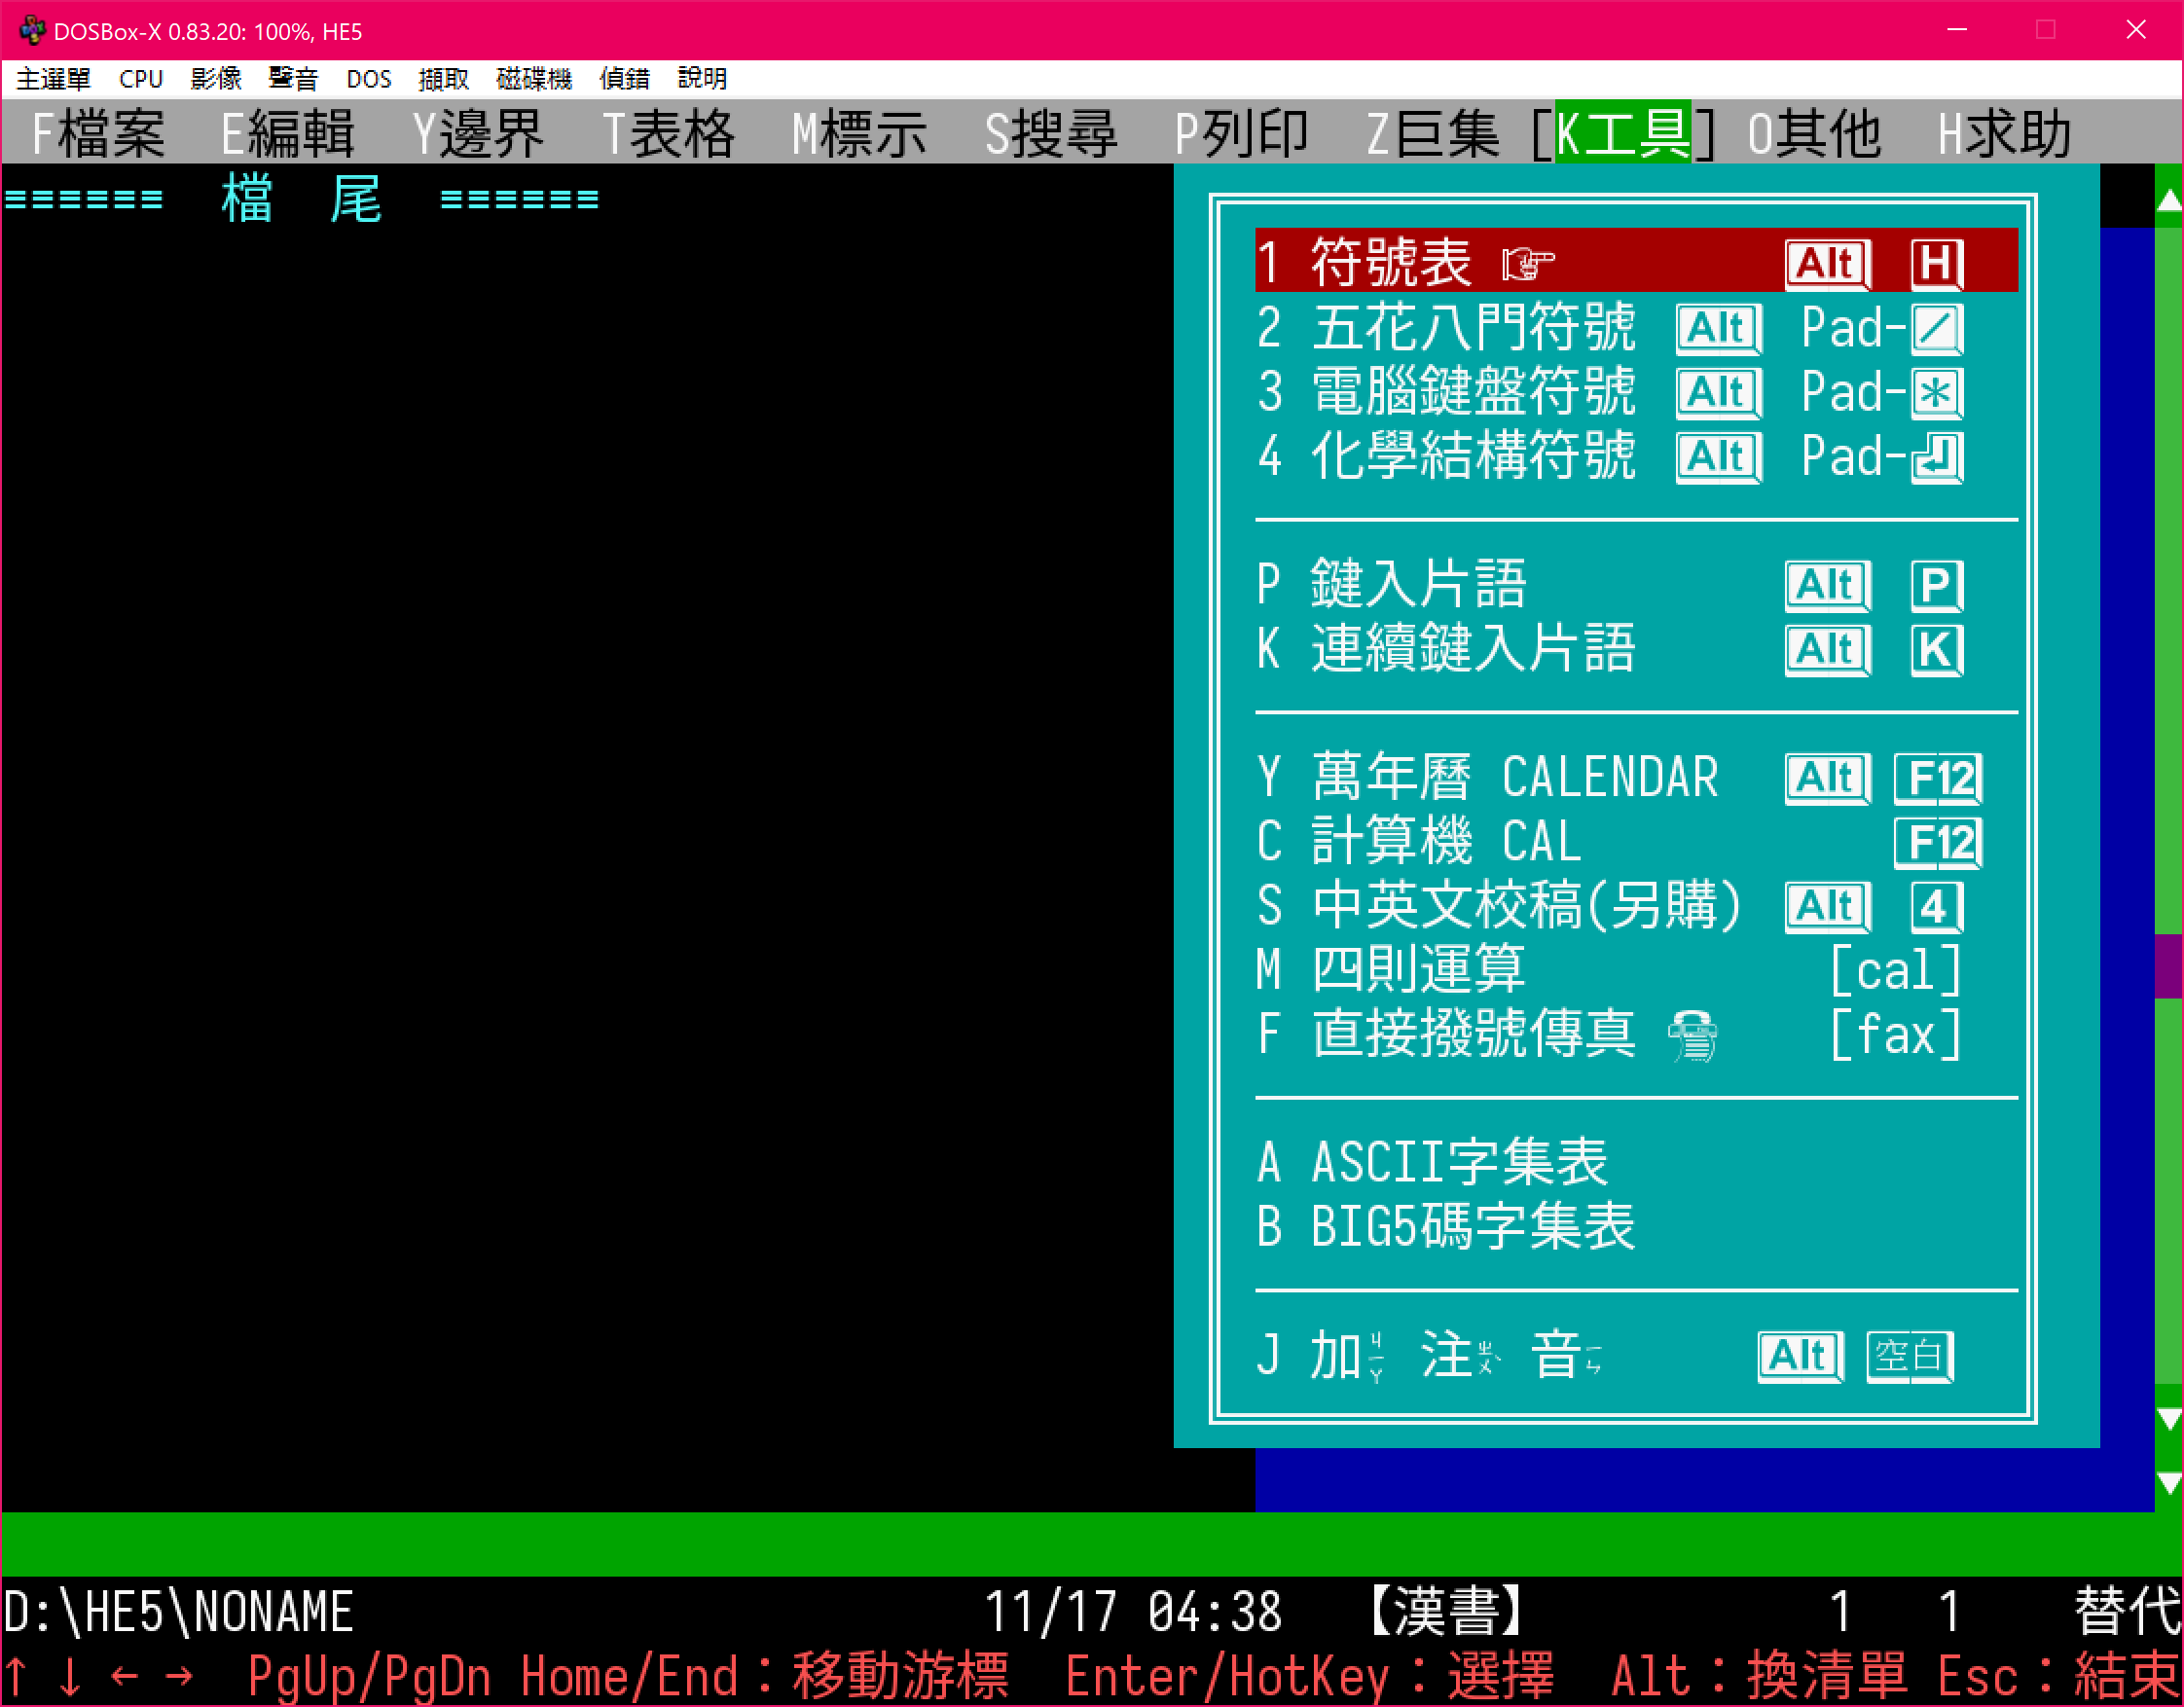 Truetype font output running Hyper Editor 5.03 with the Traditional Chinese code page and ChinaSea extension